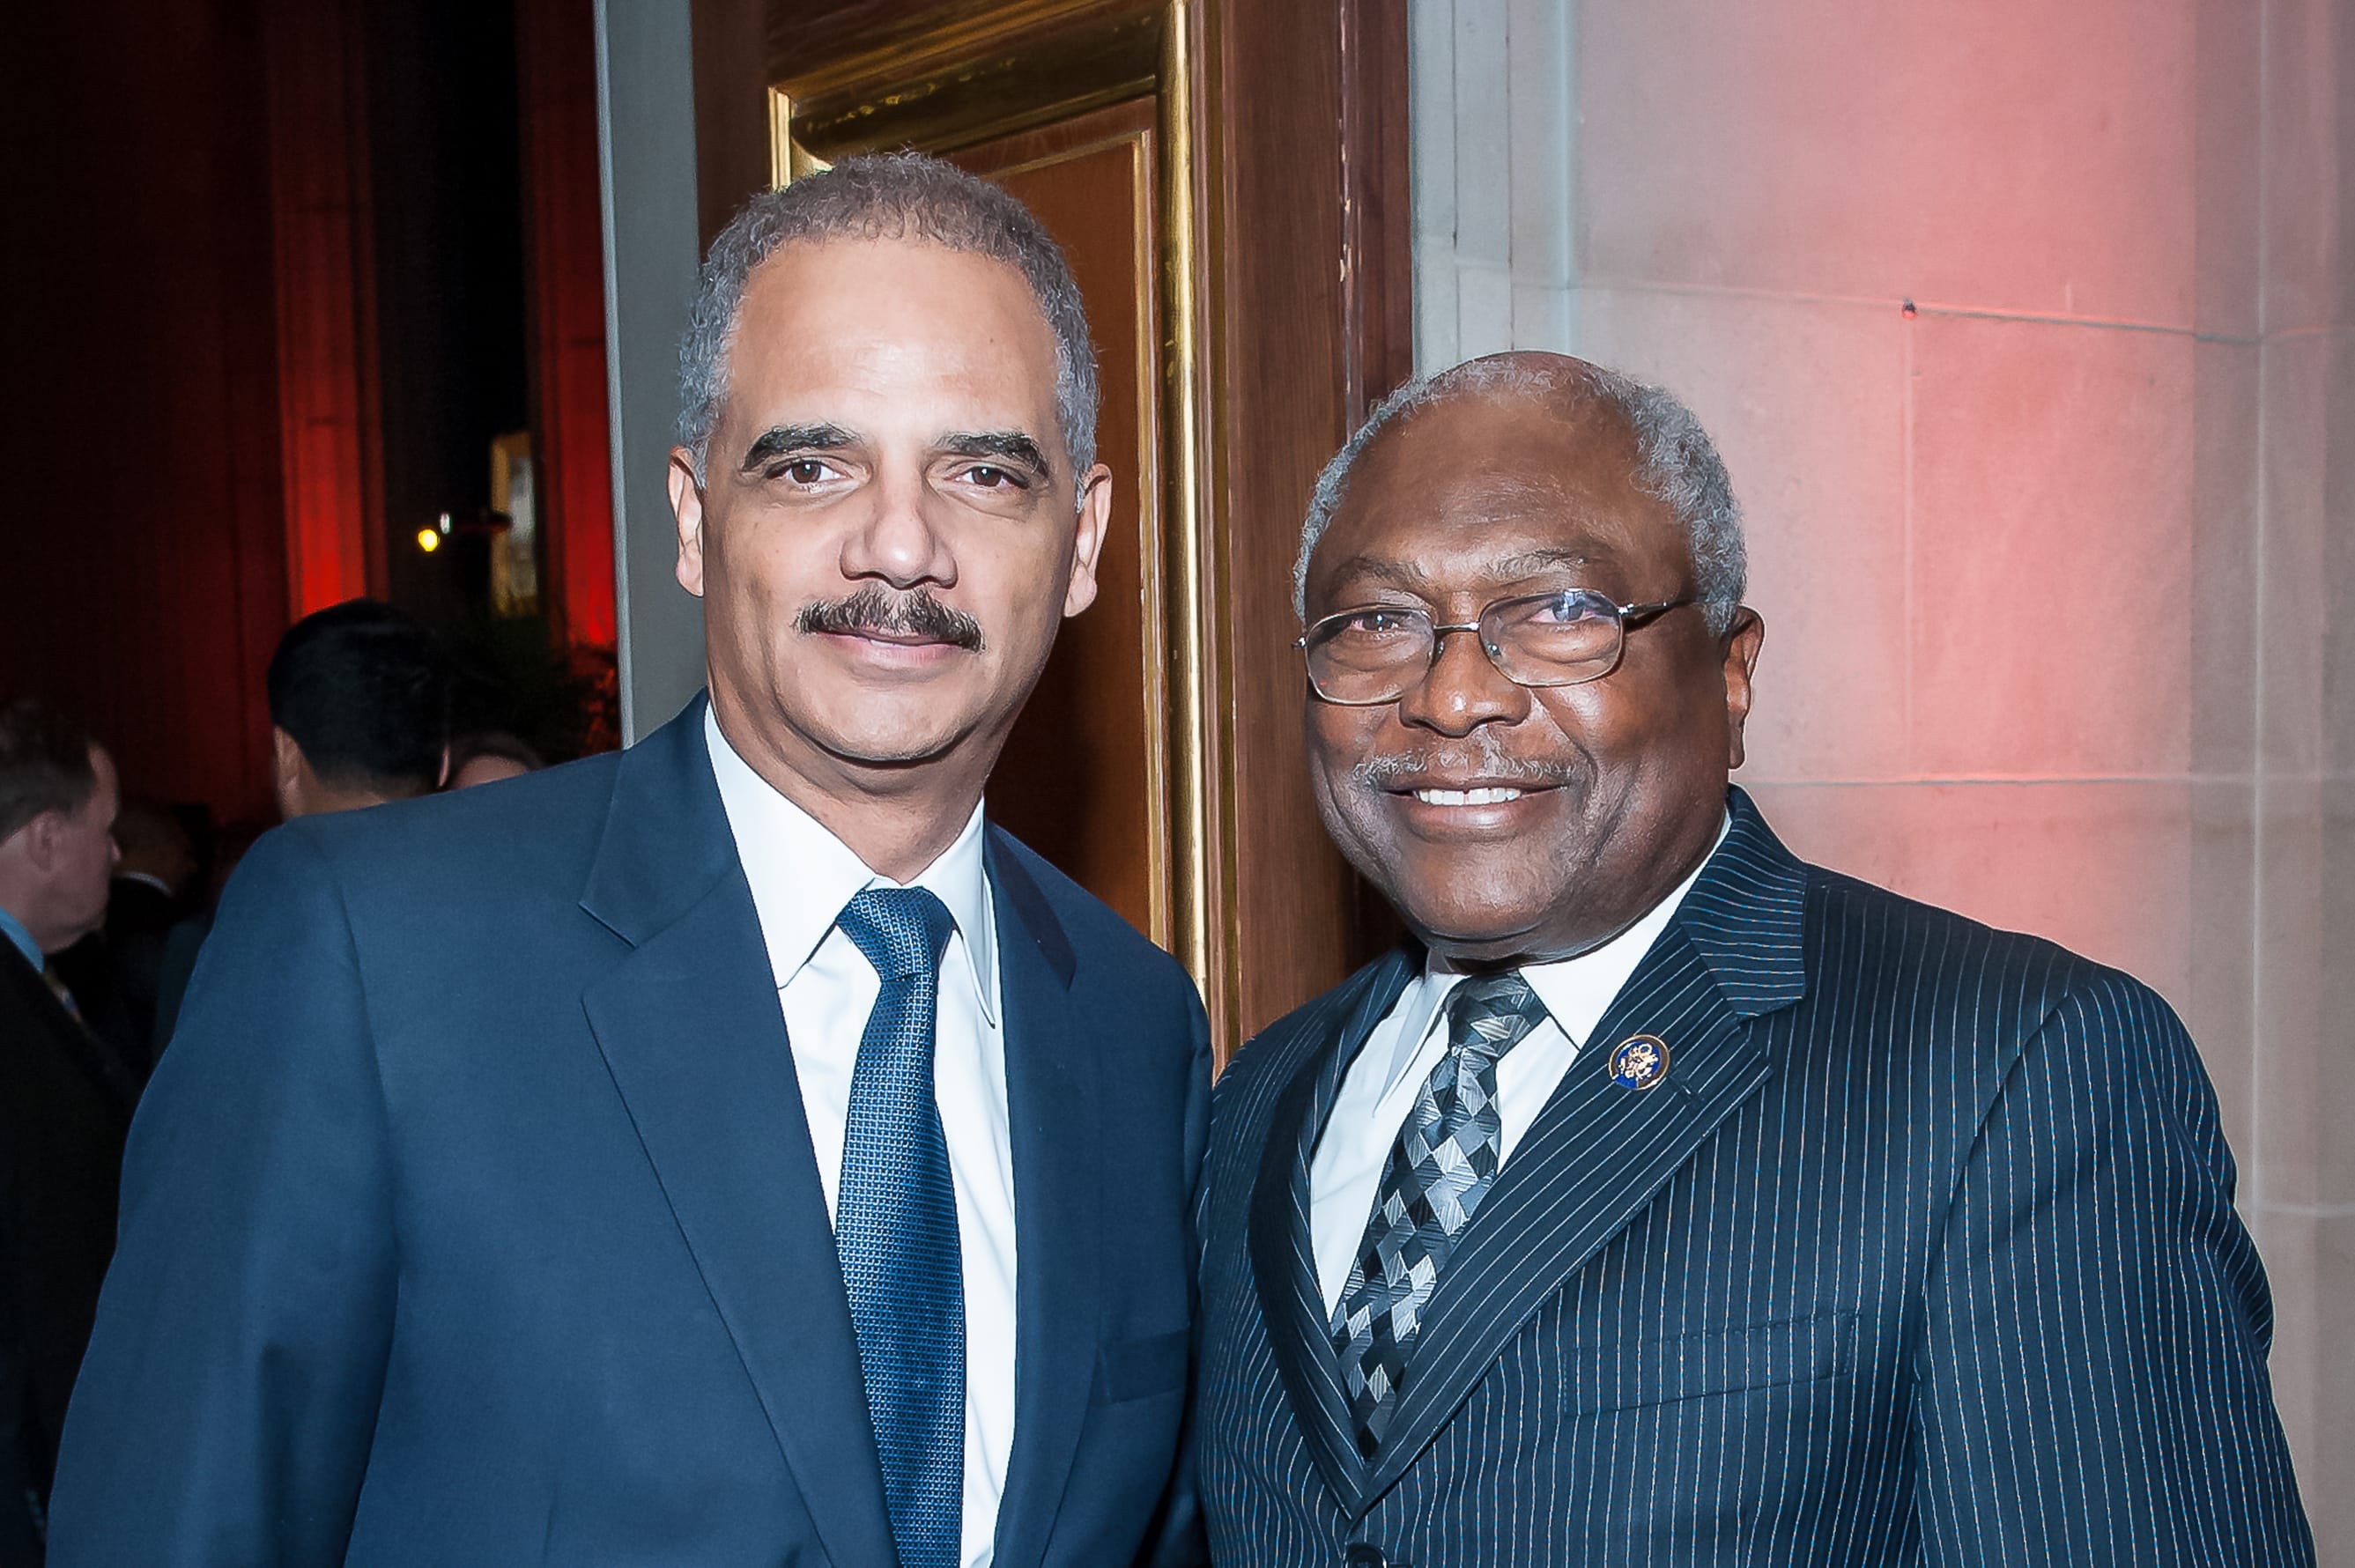 L-R: Former Attorney General Eric Holder and Congressman James Clyburn. Photo by Tony Powell, 2015.